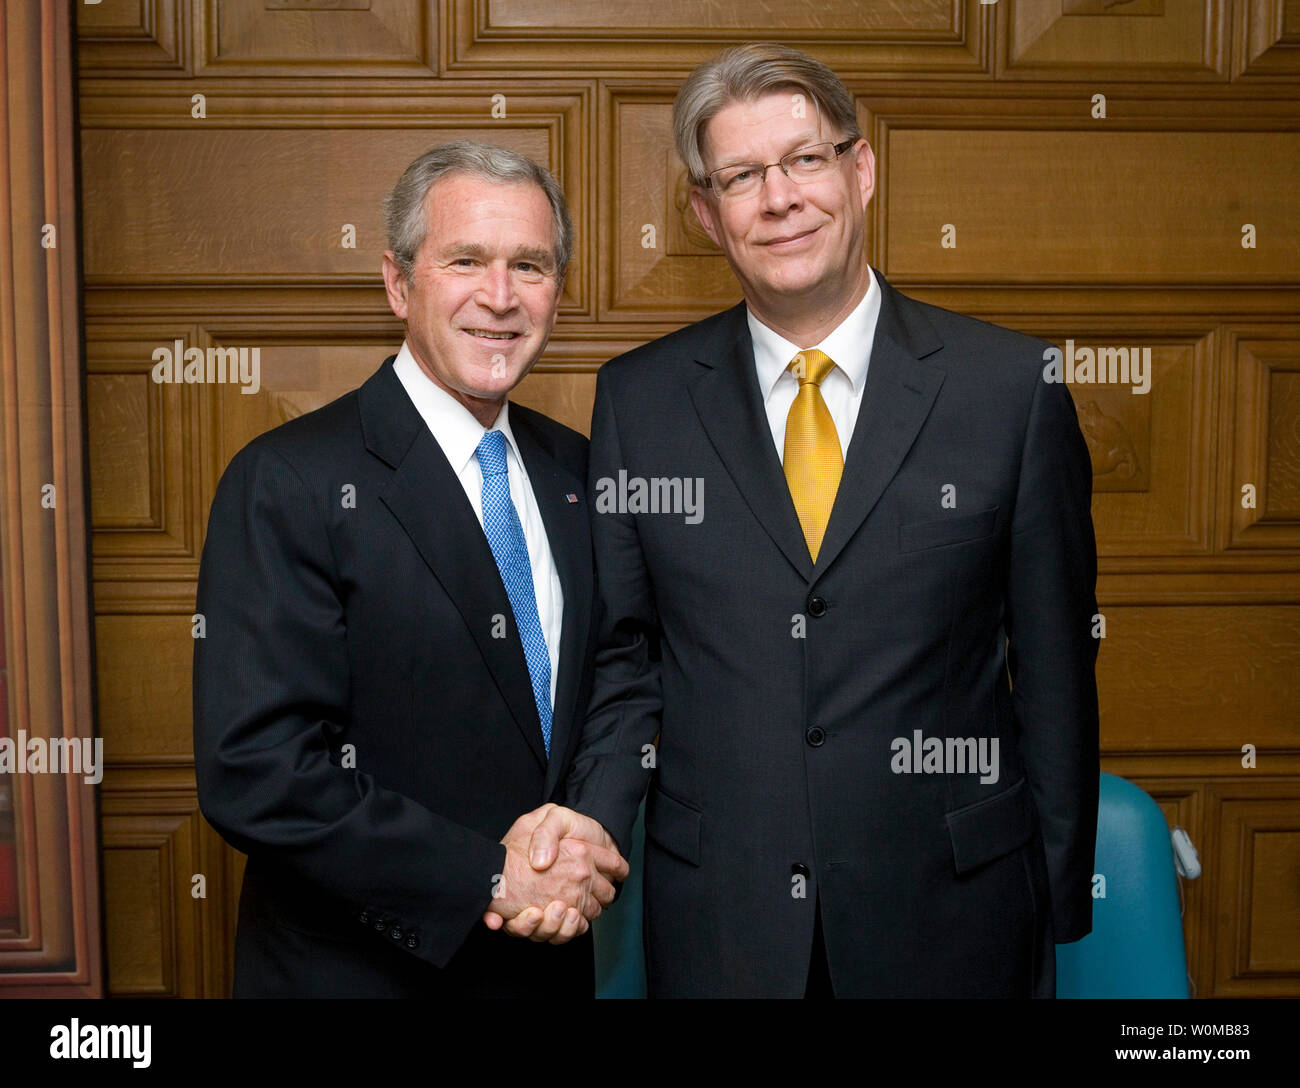 U.S. President George W. Bush (L) meets with Latvia President Valdis Zatlers during their participation in a Roundtable on Democracy at the United Nations in New York on September 25, 2007. (UPI Photo/Eric Draper/White House Press Office) Stock Photo